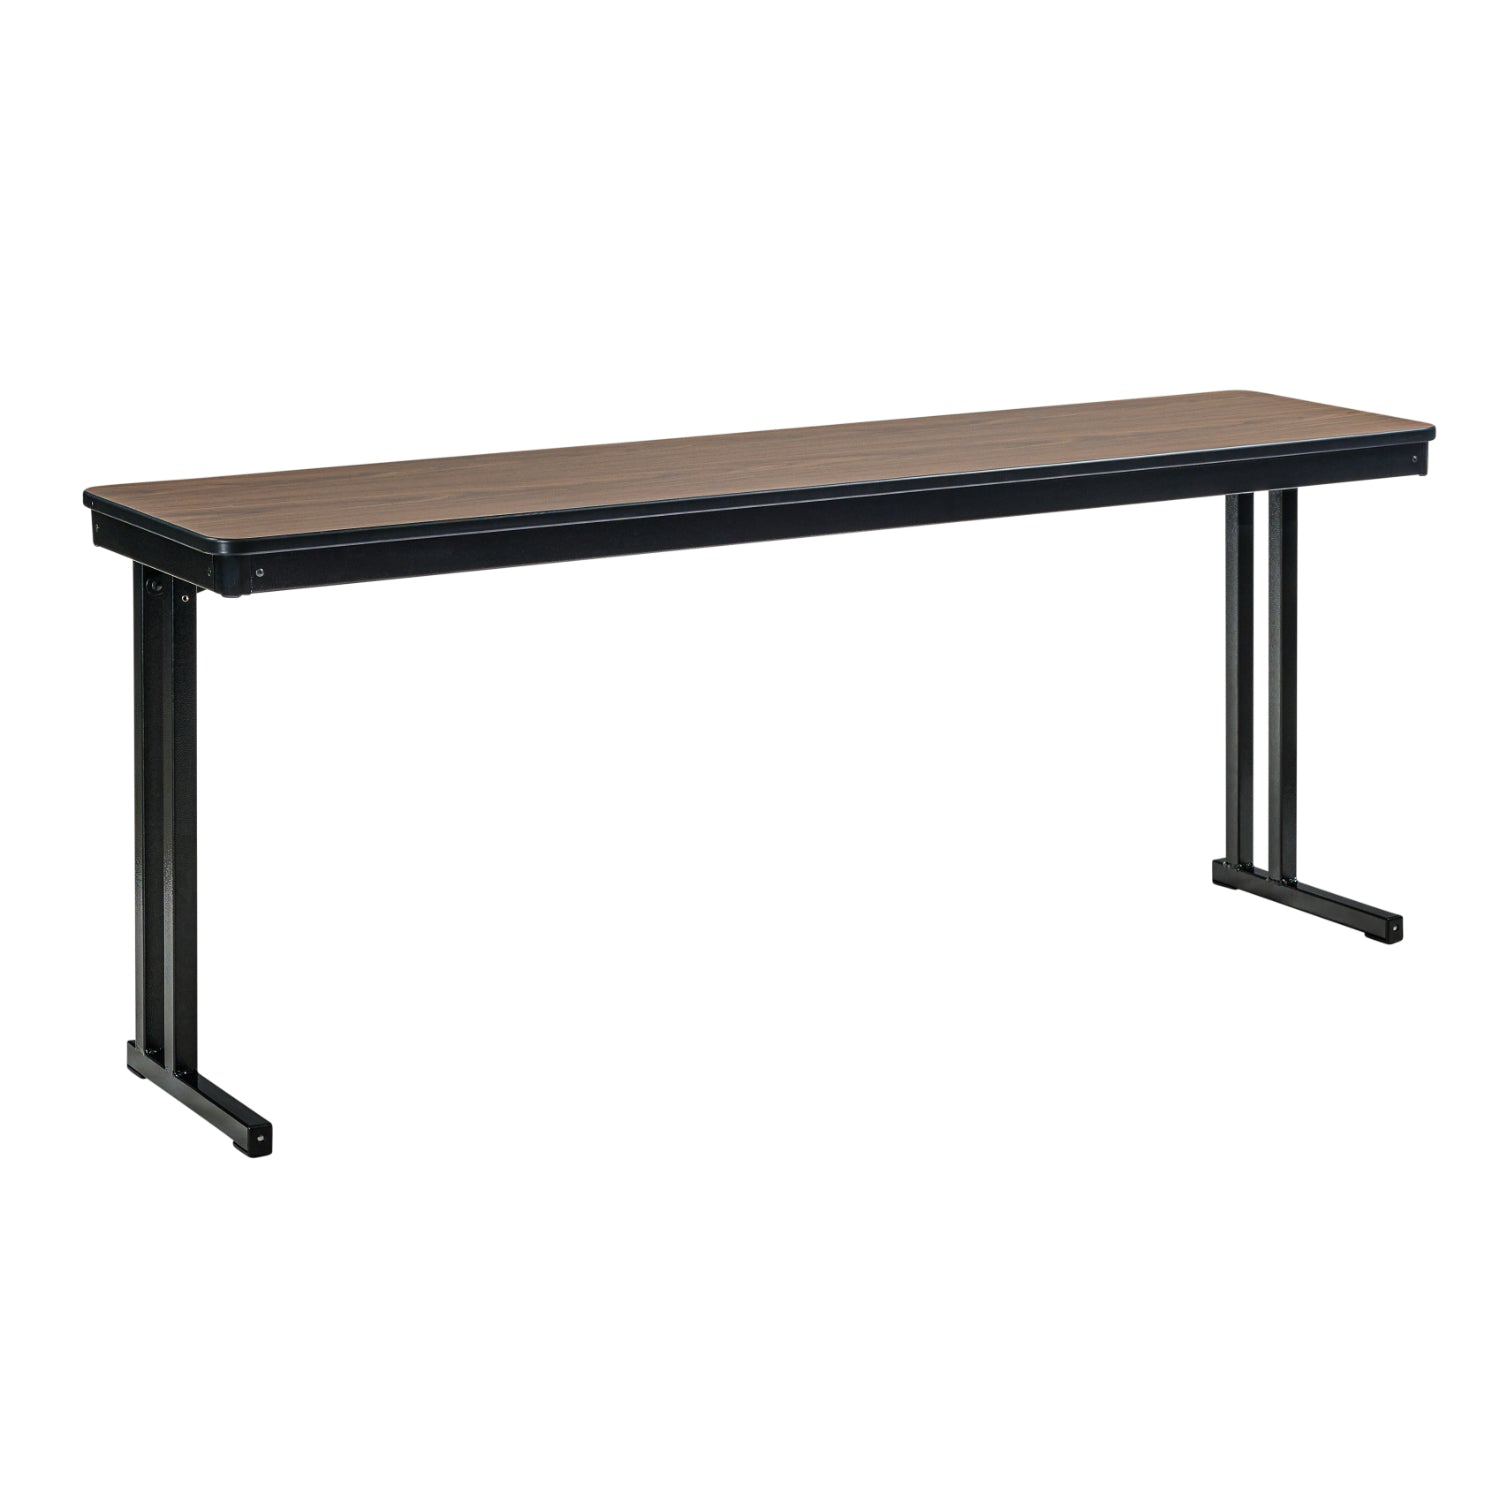 Max Seating Folding Training and Seminar Table with Cantilever Legs, 18" x 96", High Pressure Laminate Top with MDF Core/ProtectEdge